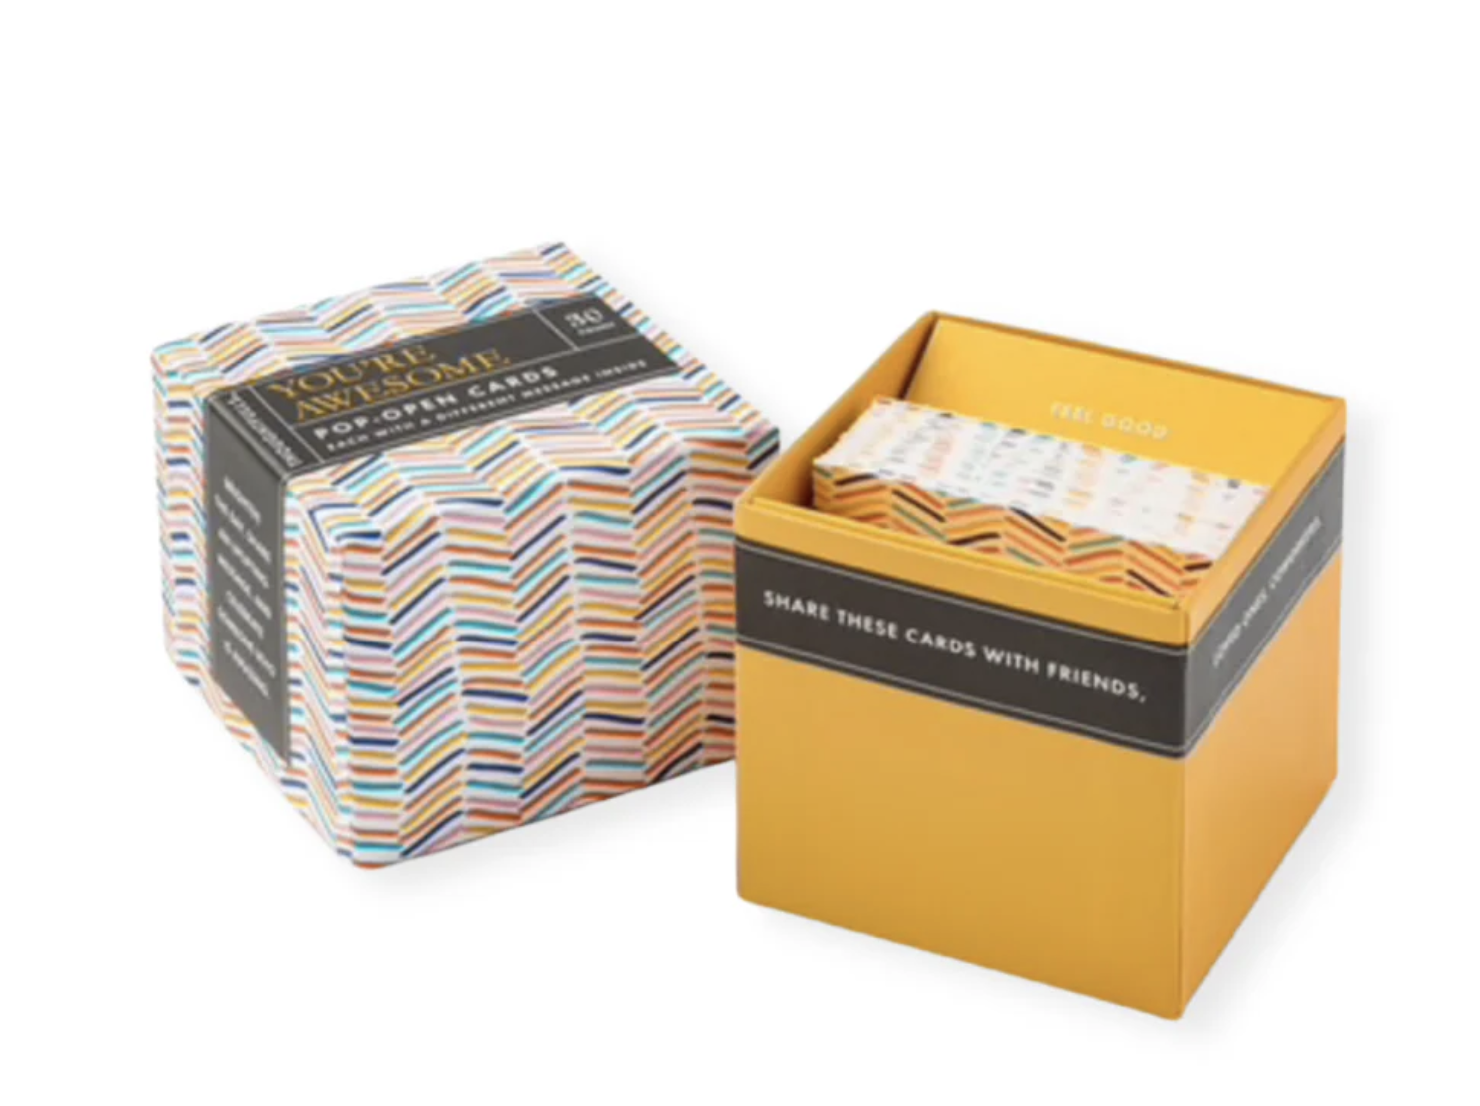 A square box featuring vibrant colors with the label "You're Awesome Pop-Open Cards." The box contains 30 cards with various inspiring messages, each designed to uplift and motivate. The cards are arranged neatly inside the box, ready to be opened and enjoyed one by one.